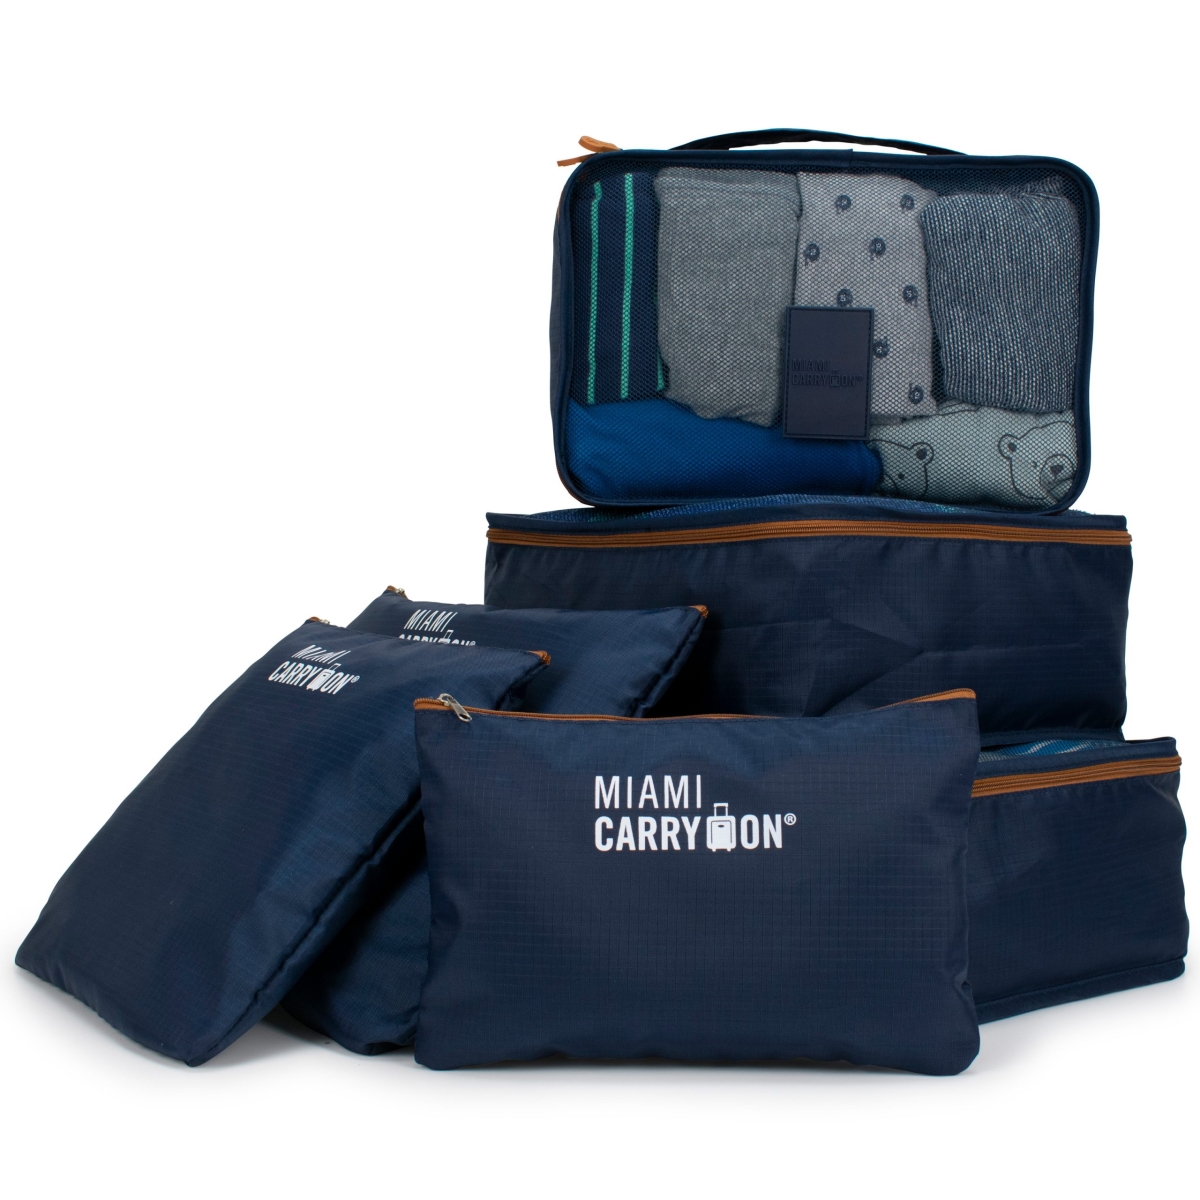 Picture of Miami Carryon TL6SBGNYTN  Collins Packing Cubes Luggage Organizer  Navy &amp; Tan - 6 Piece